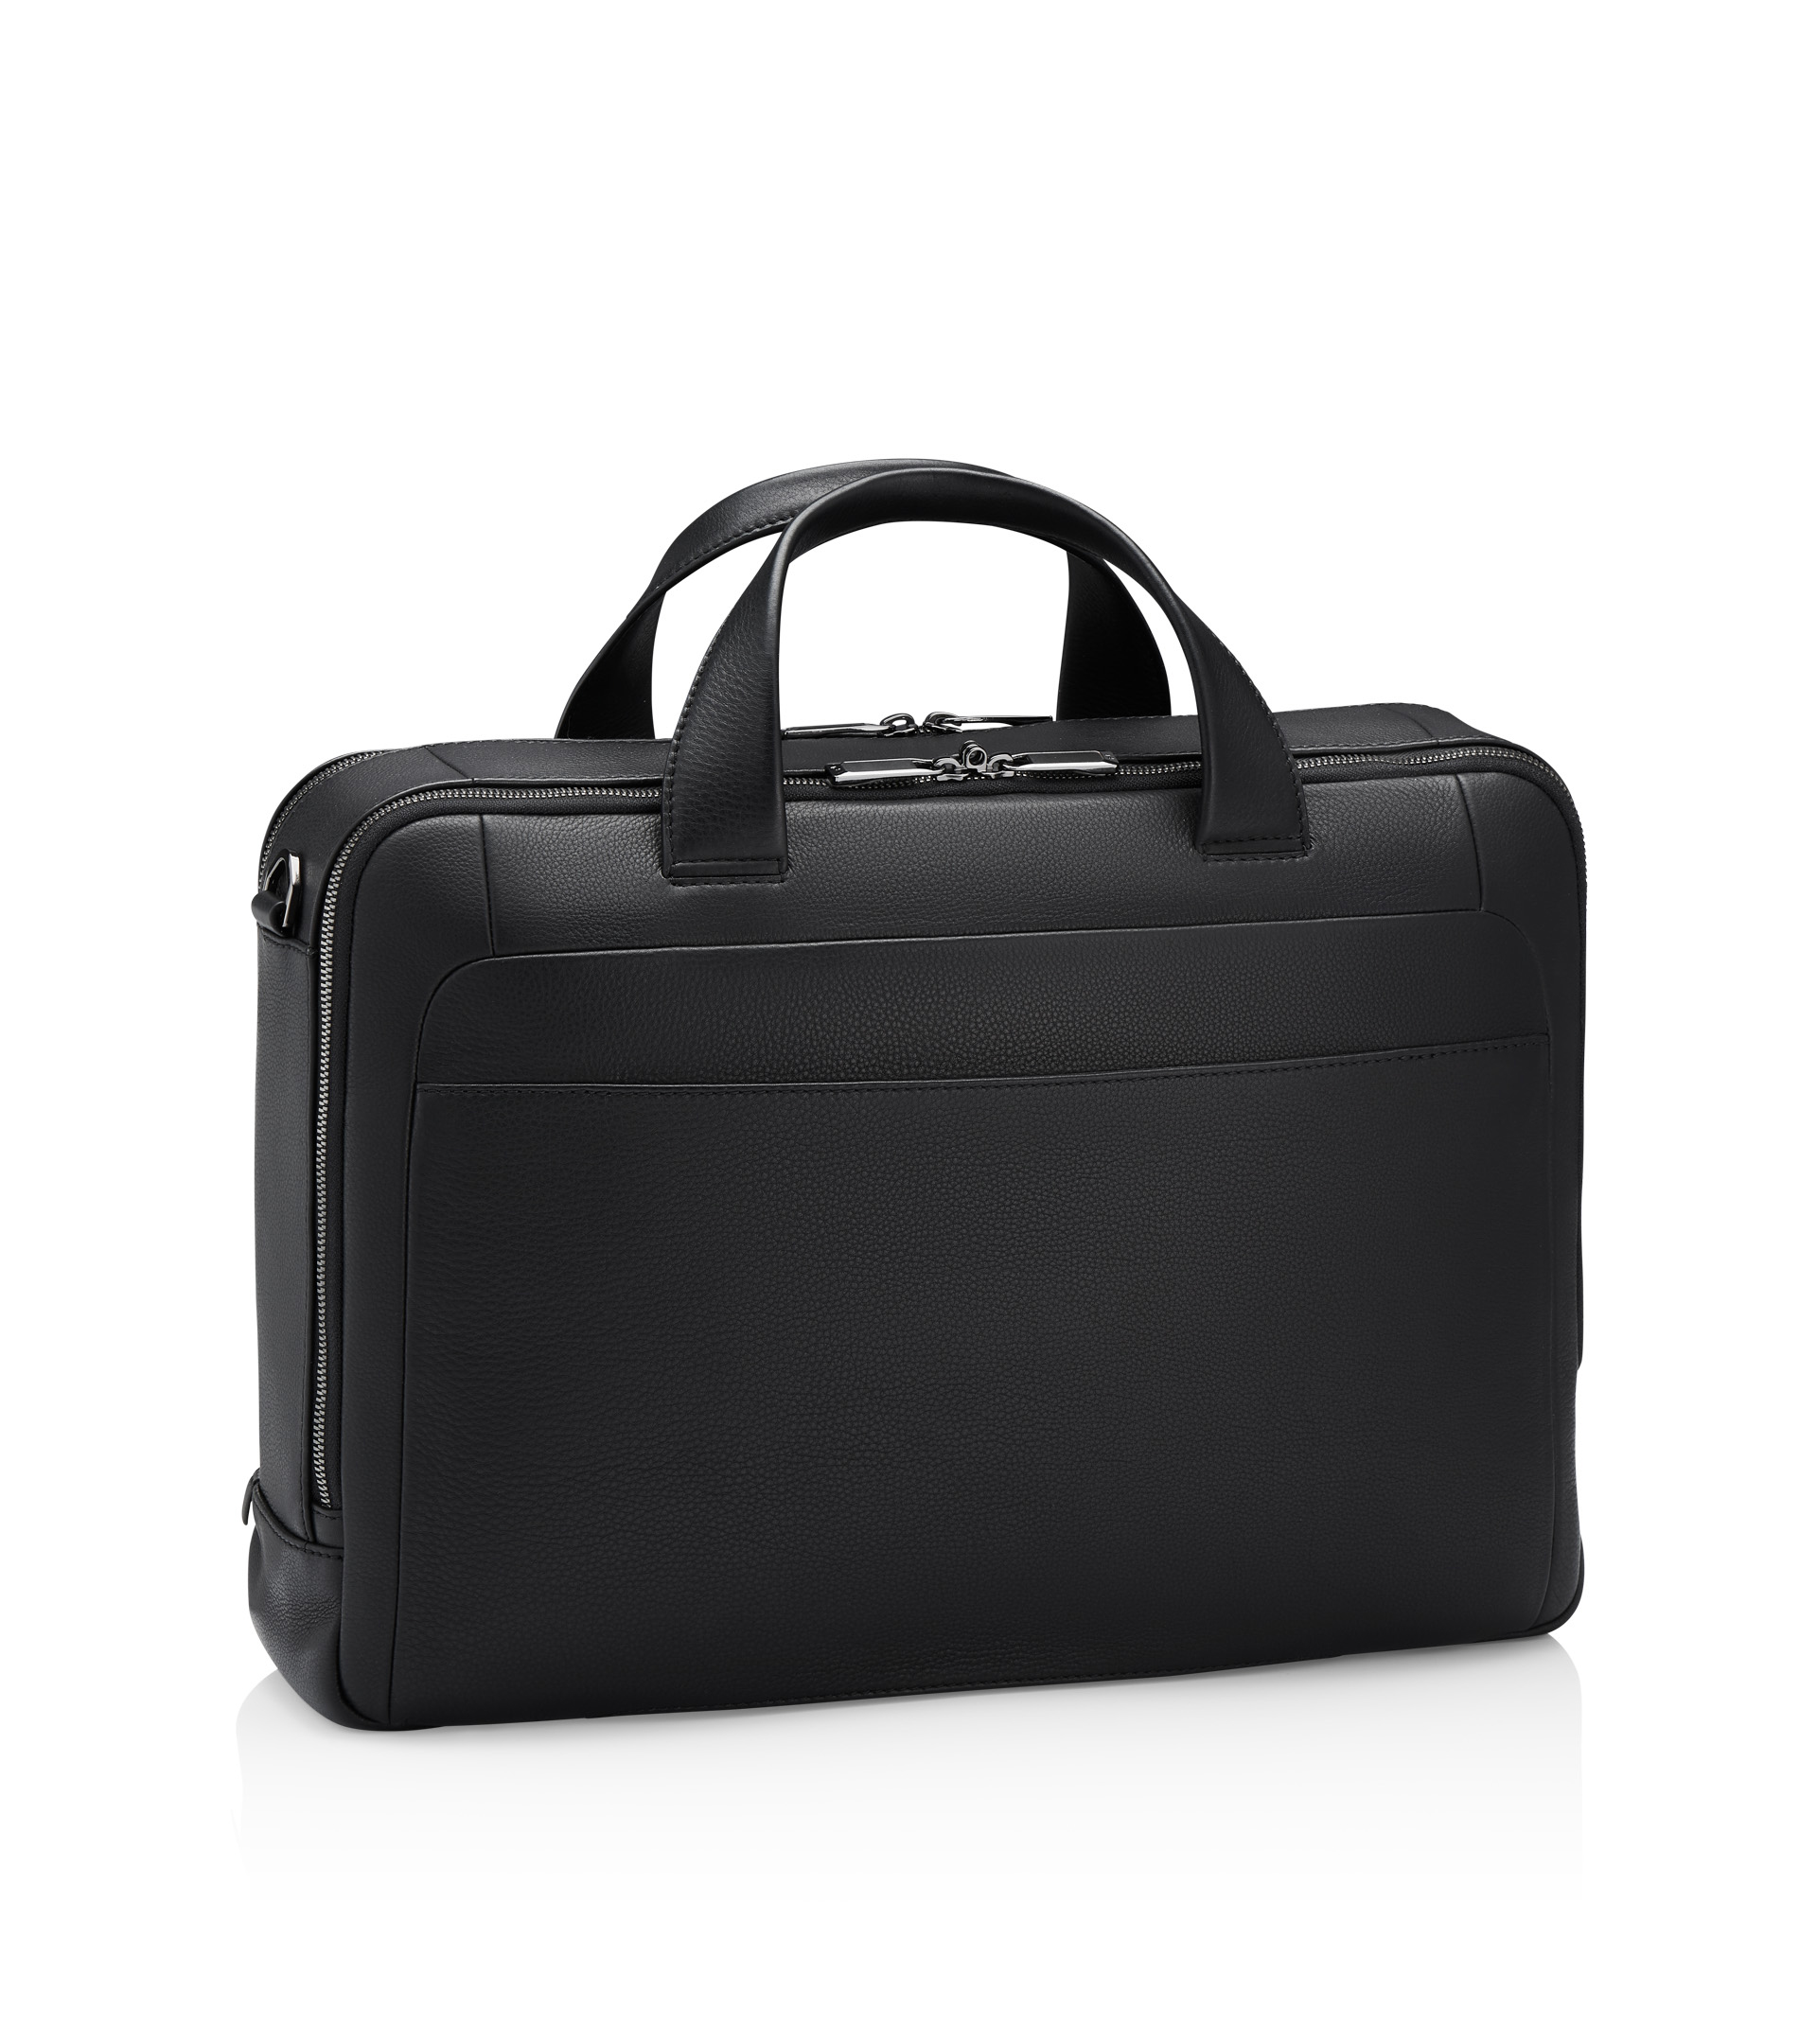 Roadster Leather Briefcase M - Luxury Business Bags for Men 